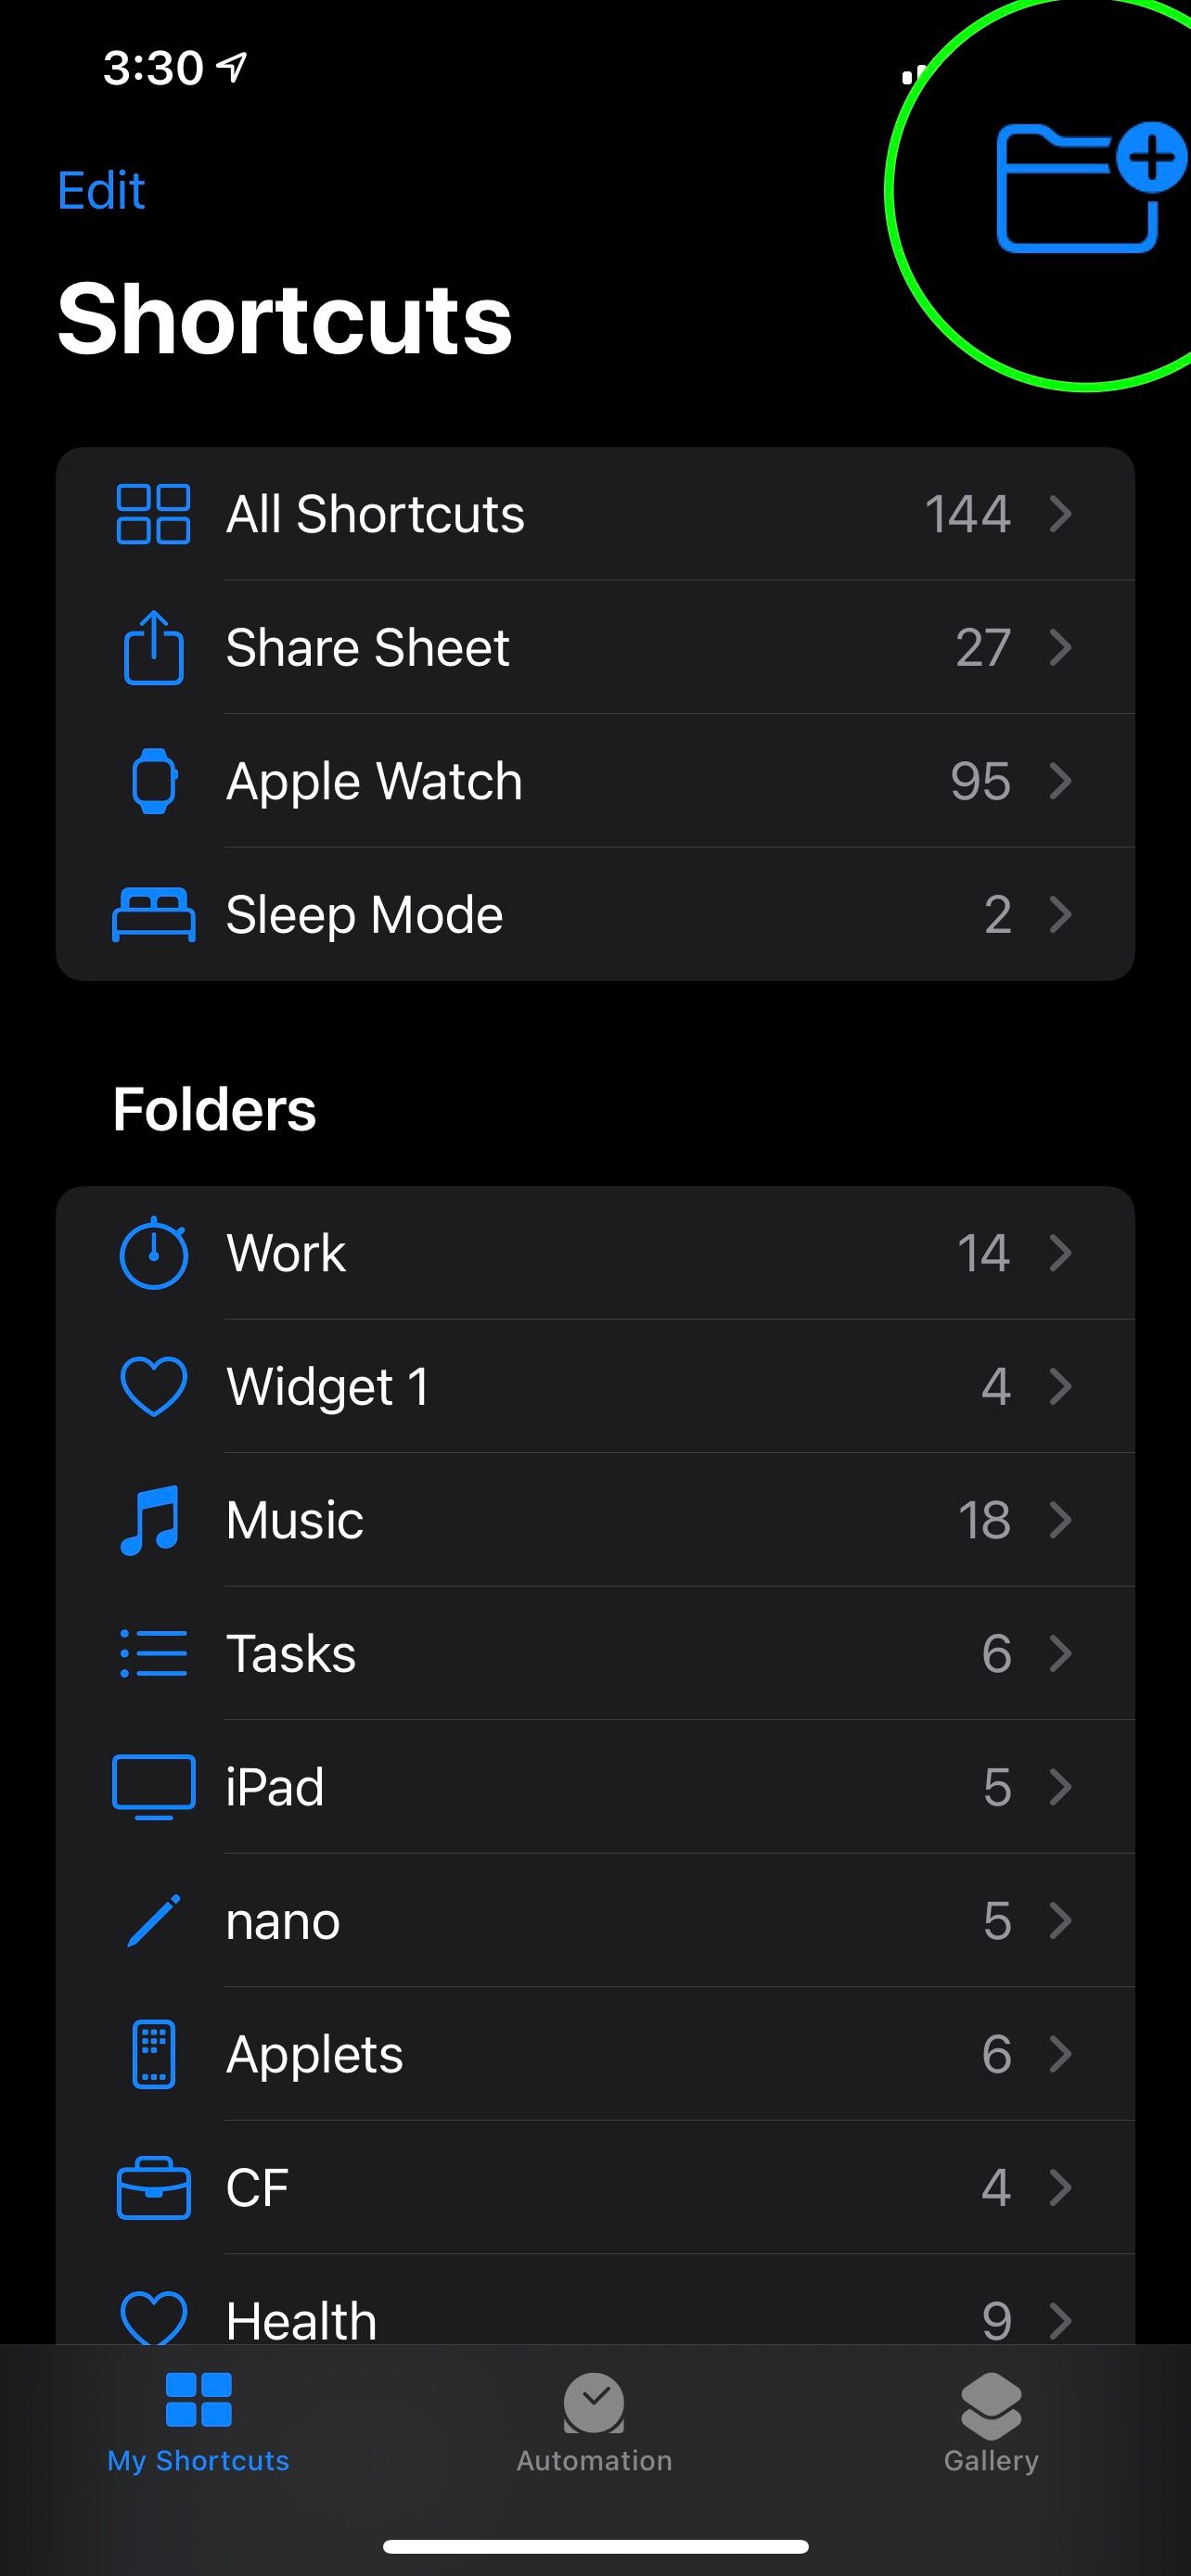 Adding a new Shortcuts folder to the list